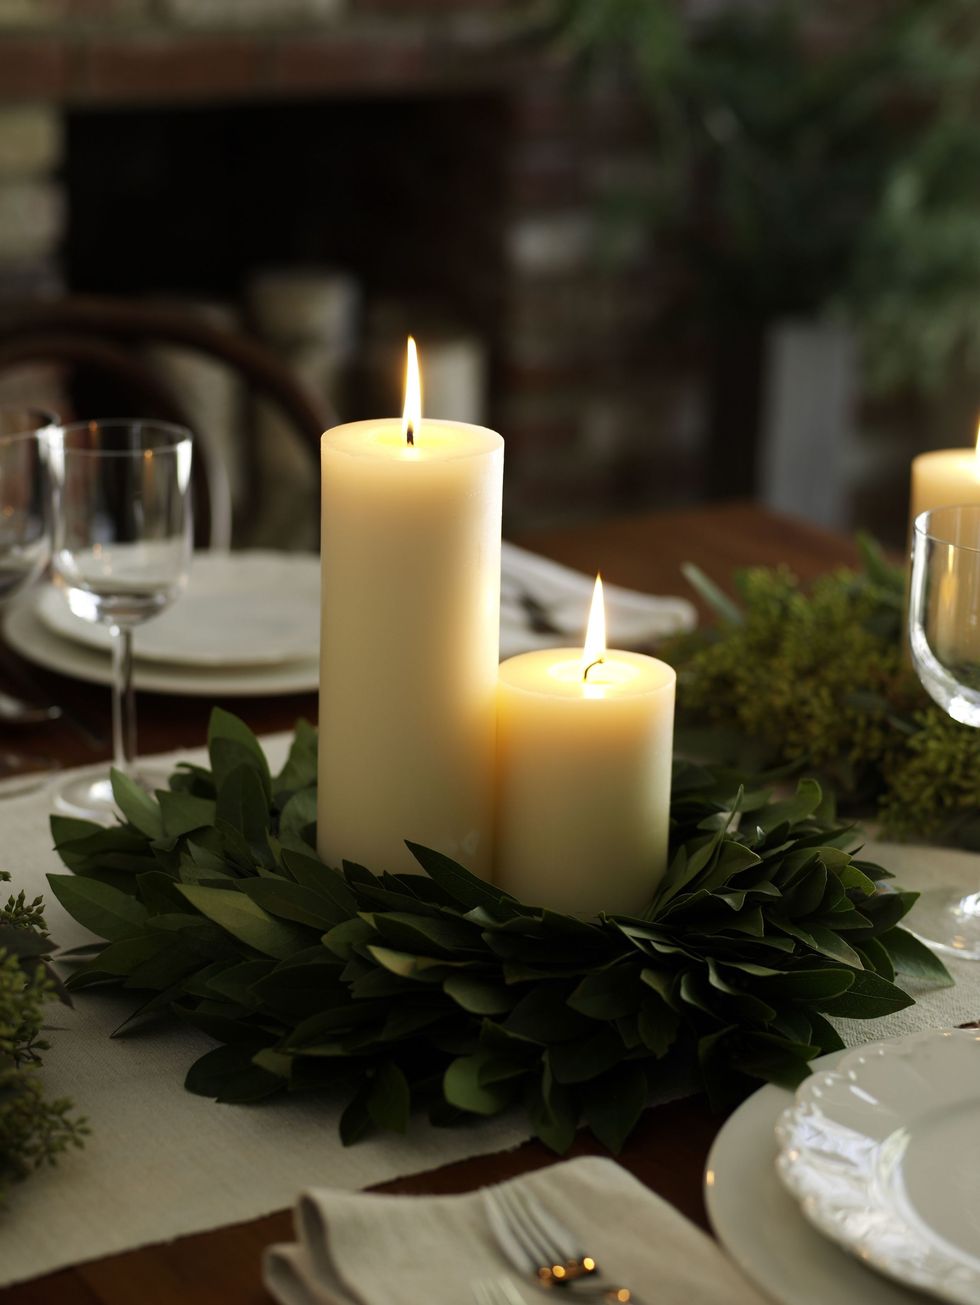 Candle, Lighting, Wax, Centrepiece, Interior design, Candle holder, Table, Flameless candle, Branch, Room, 